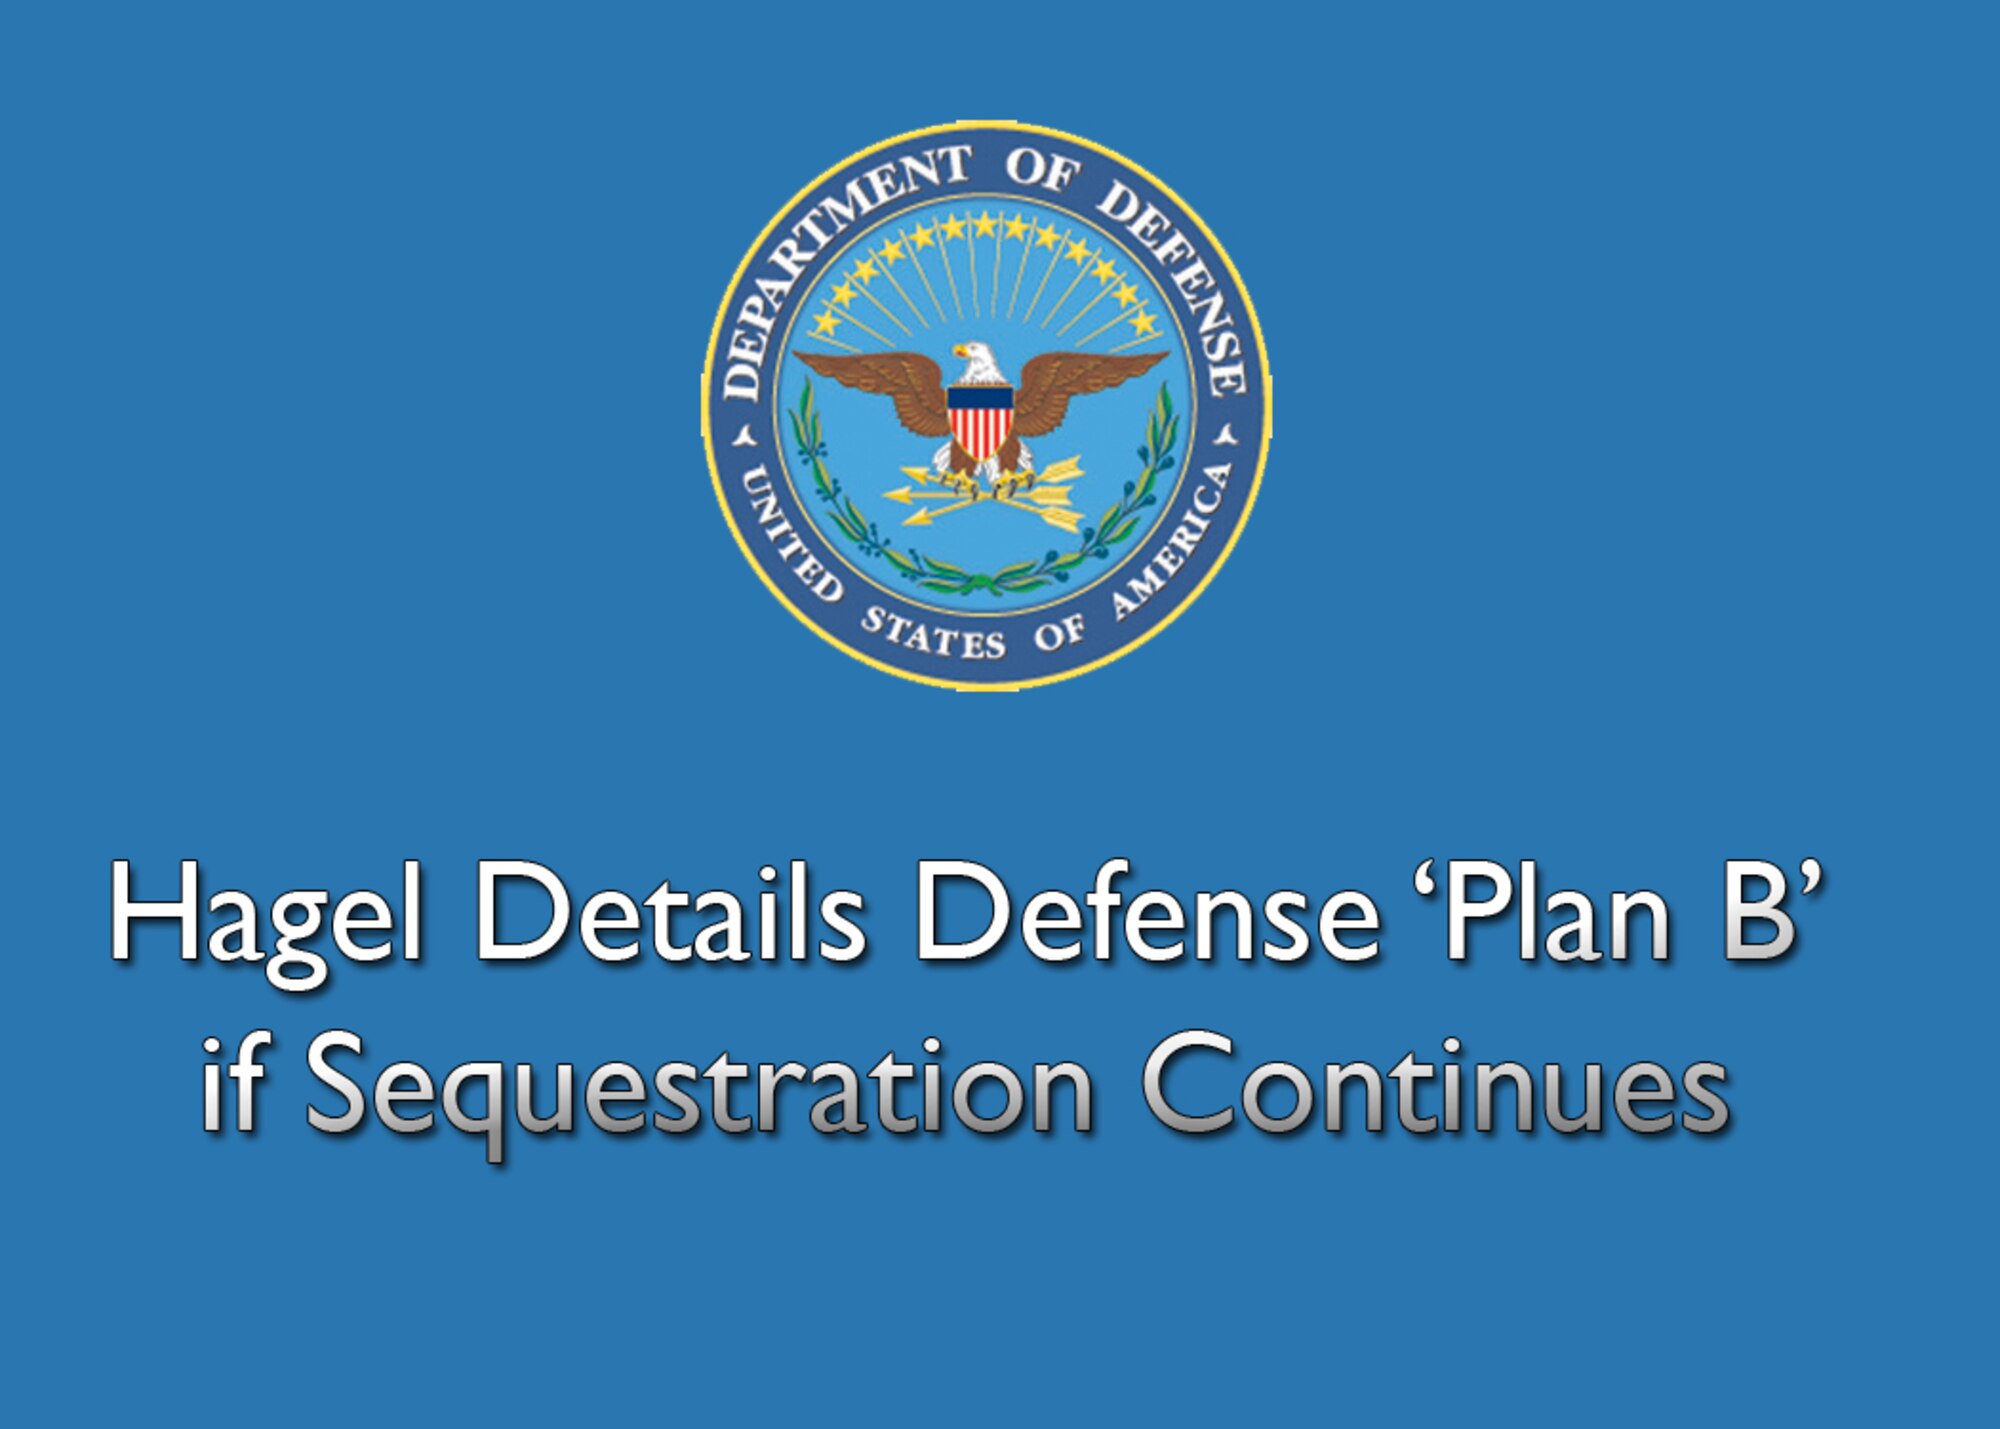 If sequestration continues into fiscal year 2014, the Defense Department will be forced to consider involuntary reductions-in-force for the civilian workforce, draconian cuts to military personnel accounts and a virtual halt to military modernization, Defense Secretary Chuck Hagel said in a letter to Senate leaders July 10.
